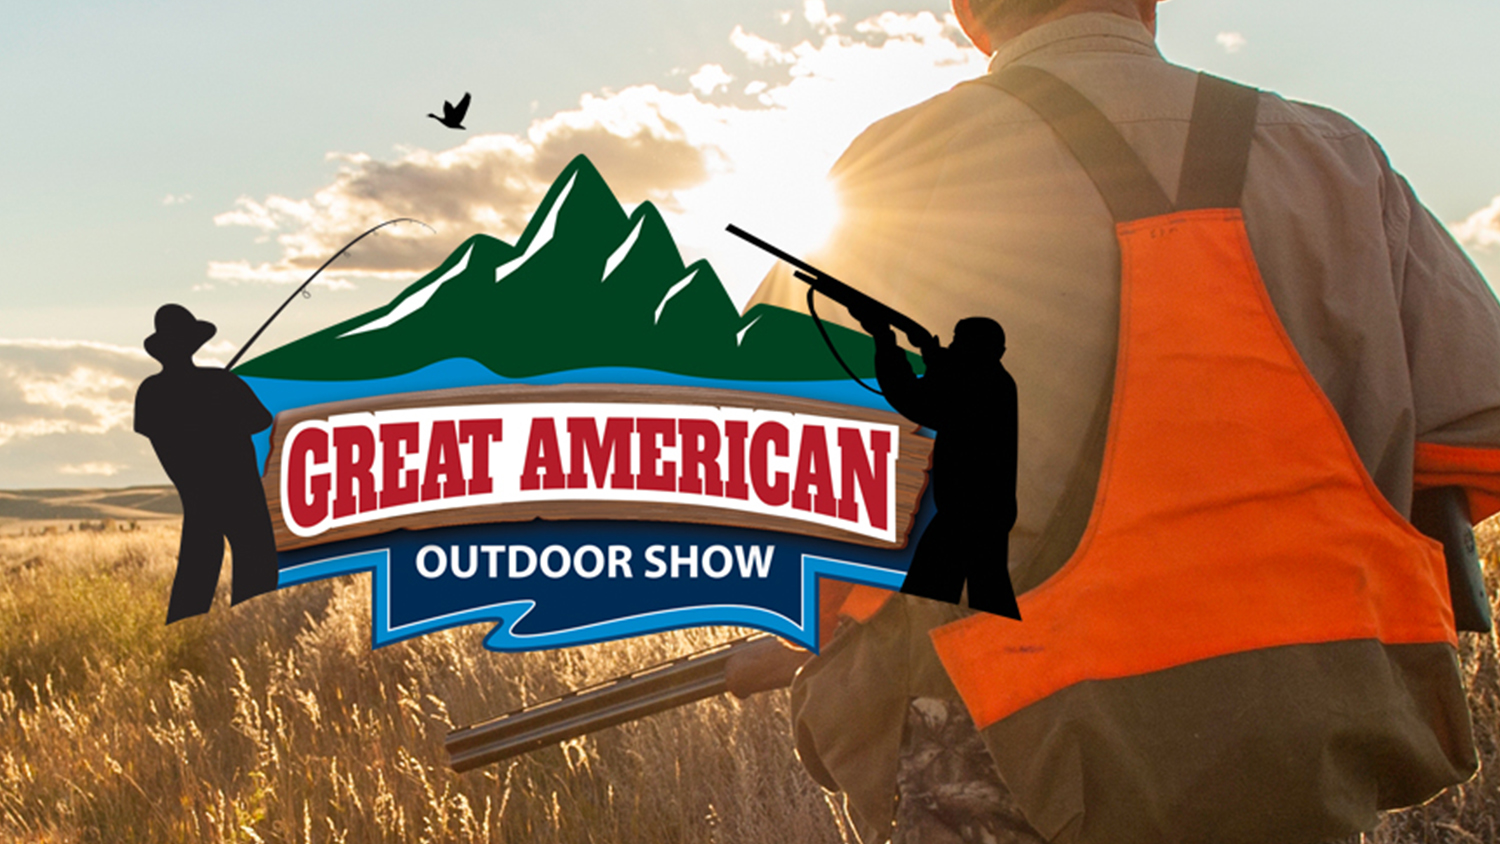 Great American Outdoor Show Events: Sunday, February 7th